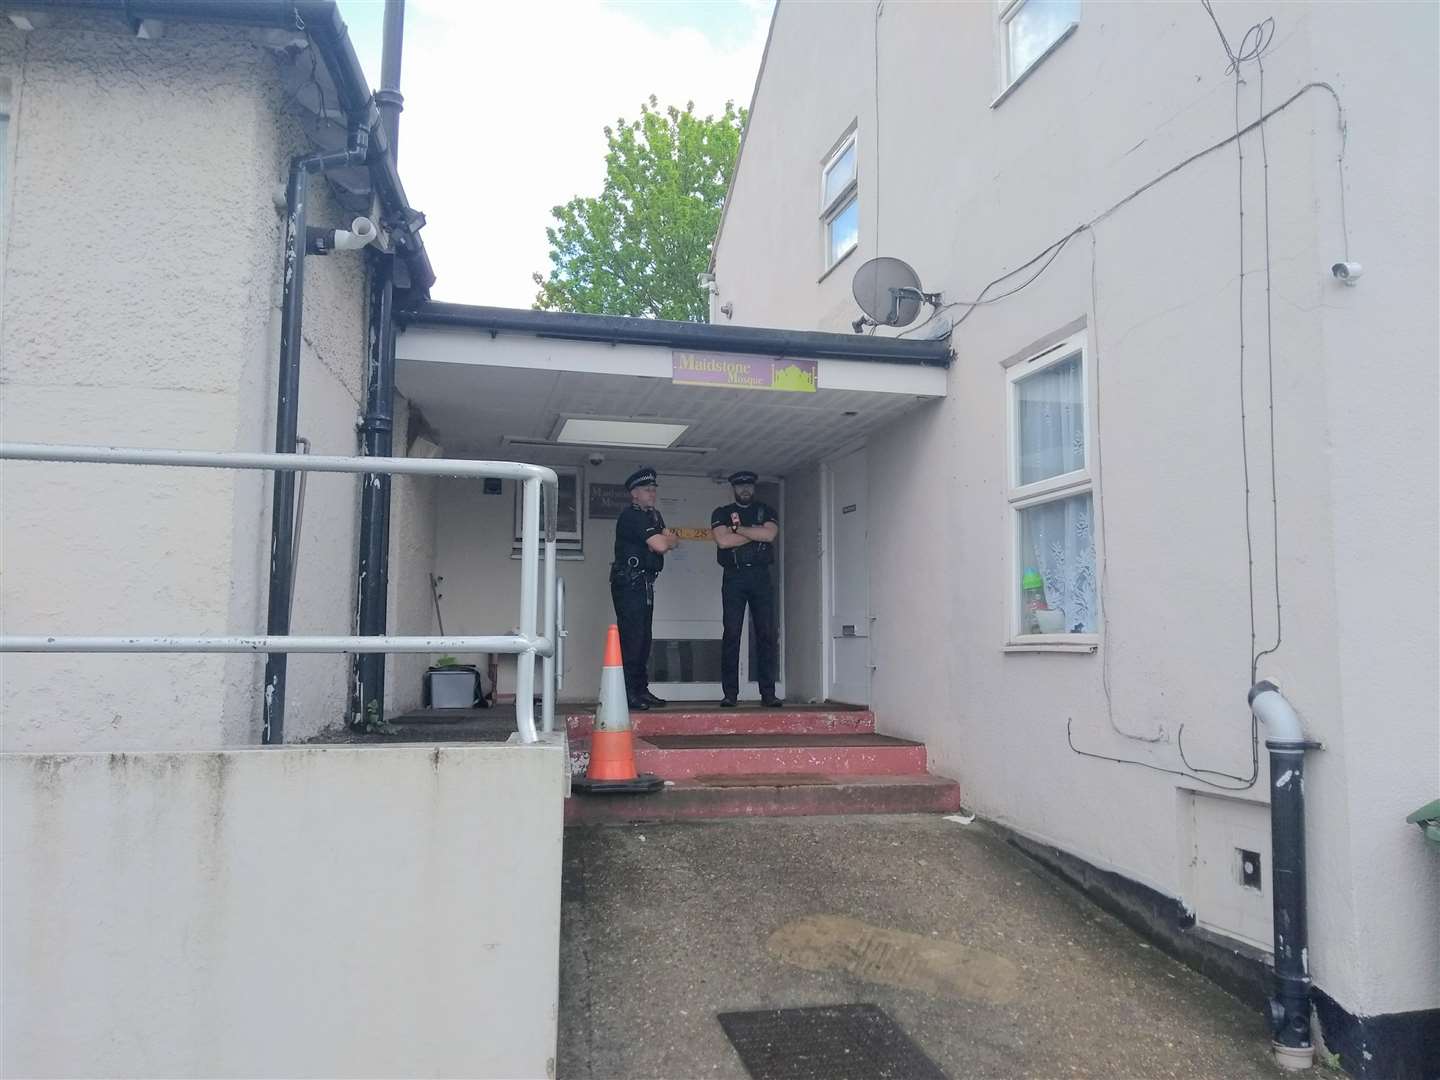 Police set up a cordon outside Maidstone Mosque